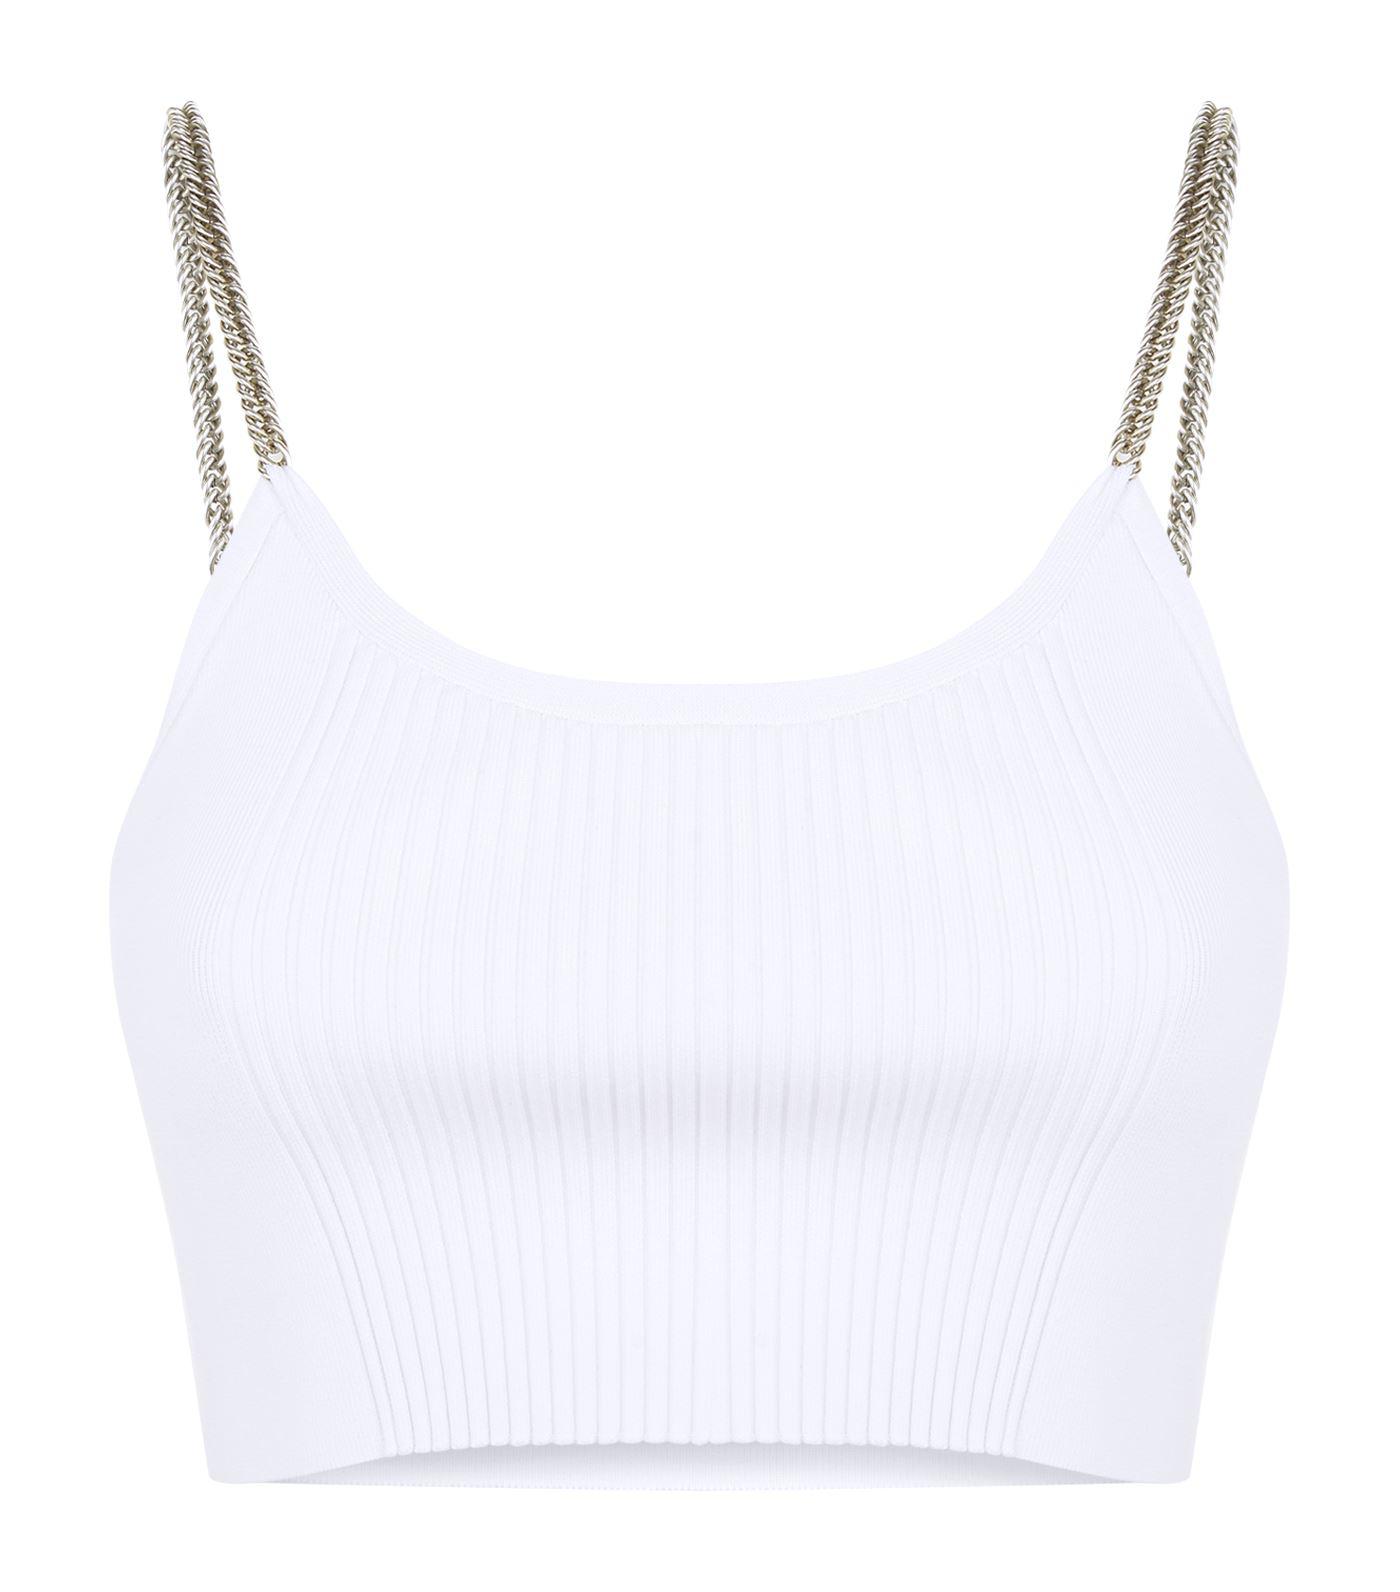 Mauve Gøre mit bedste excentrisk Alexander Wang Chain Strap Crop Top in White | Lyst